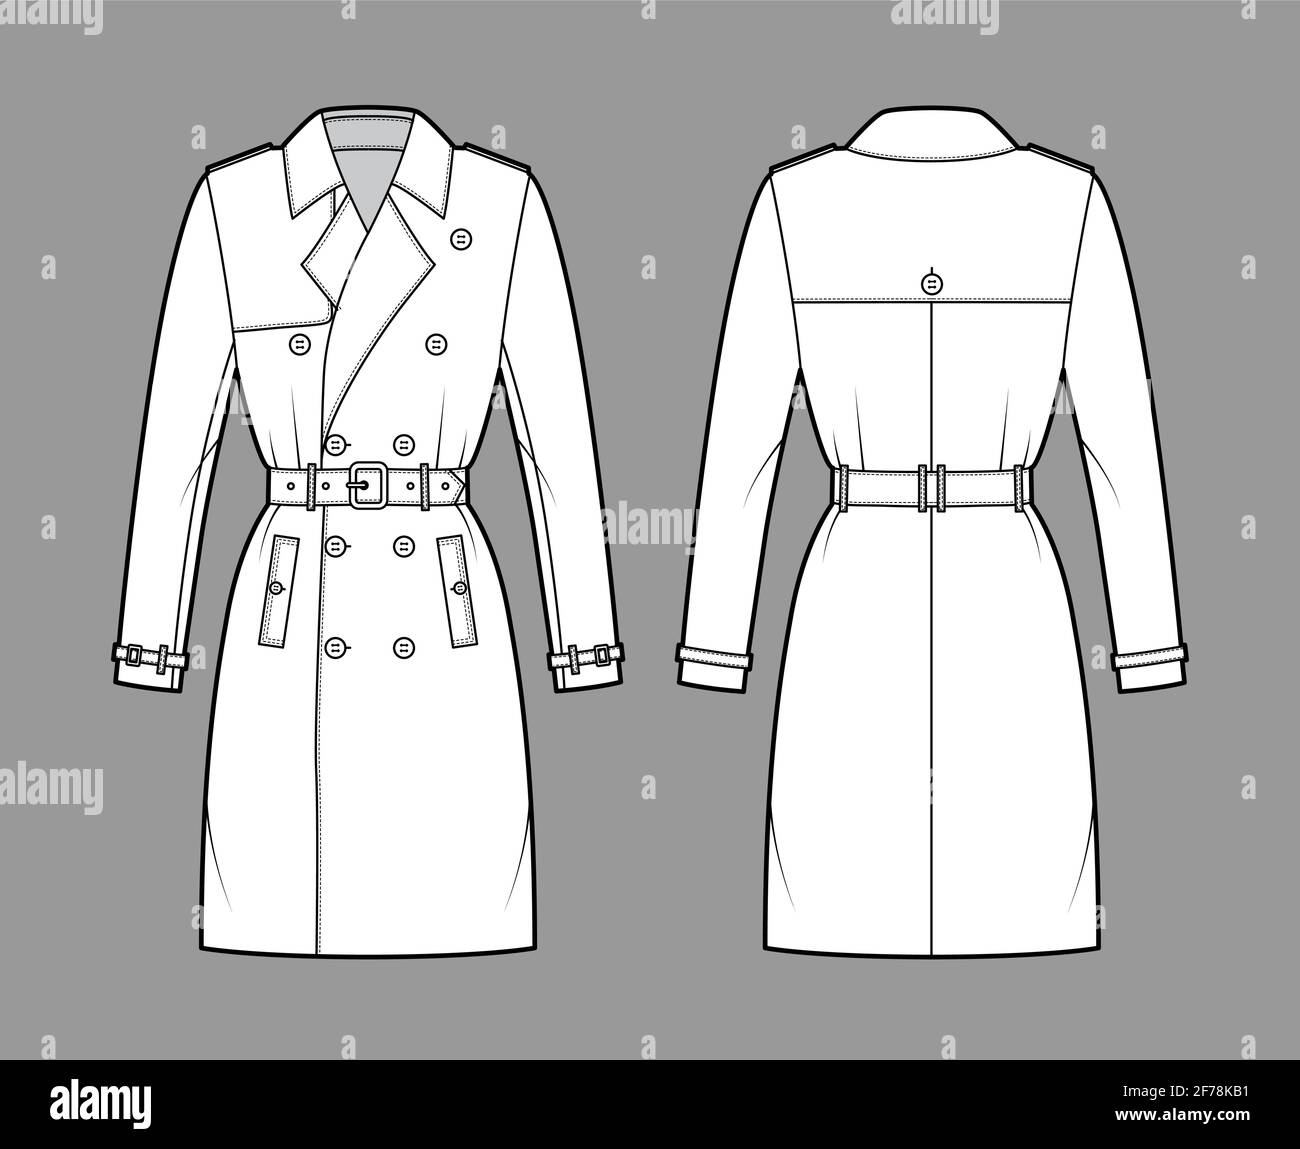 Trench coat technical fashion illustration with belt, fitted, long ...